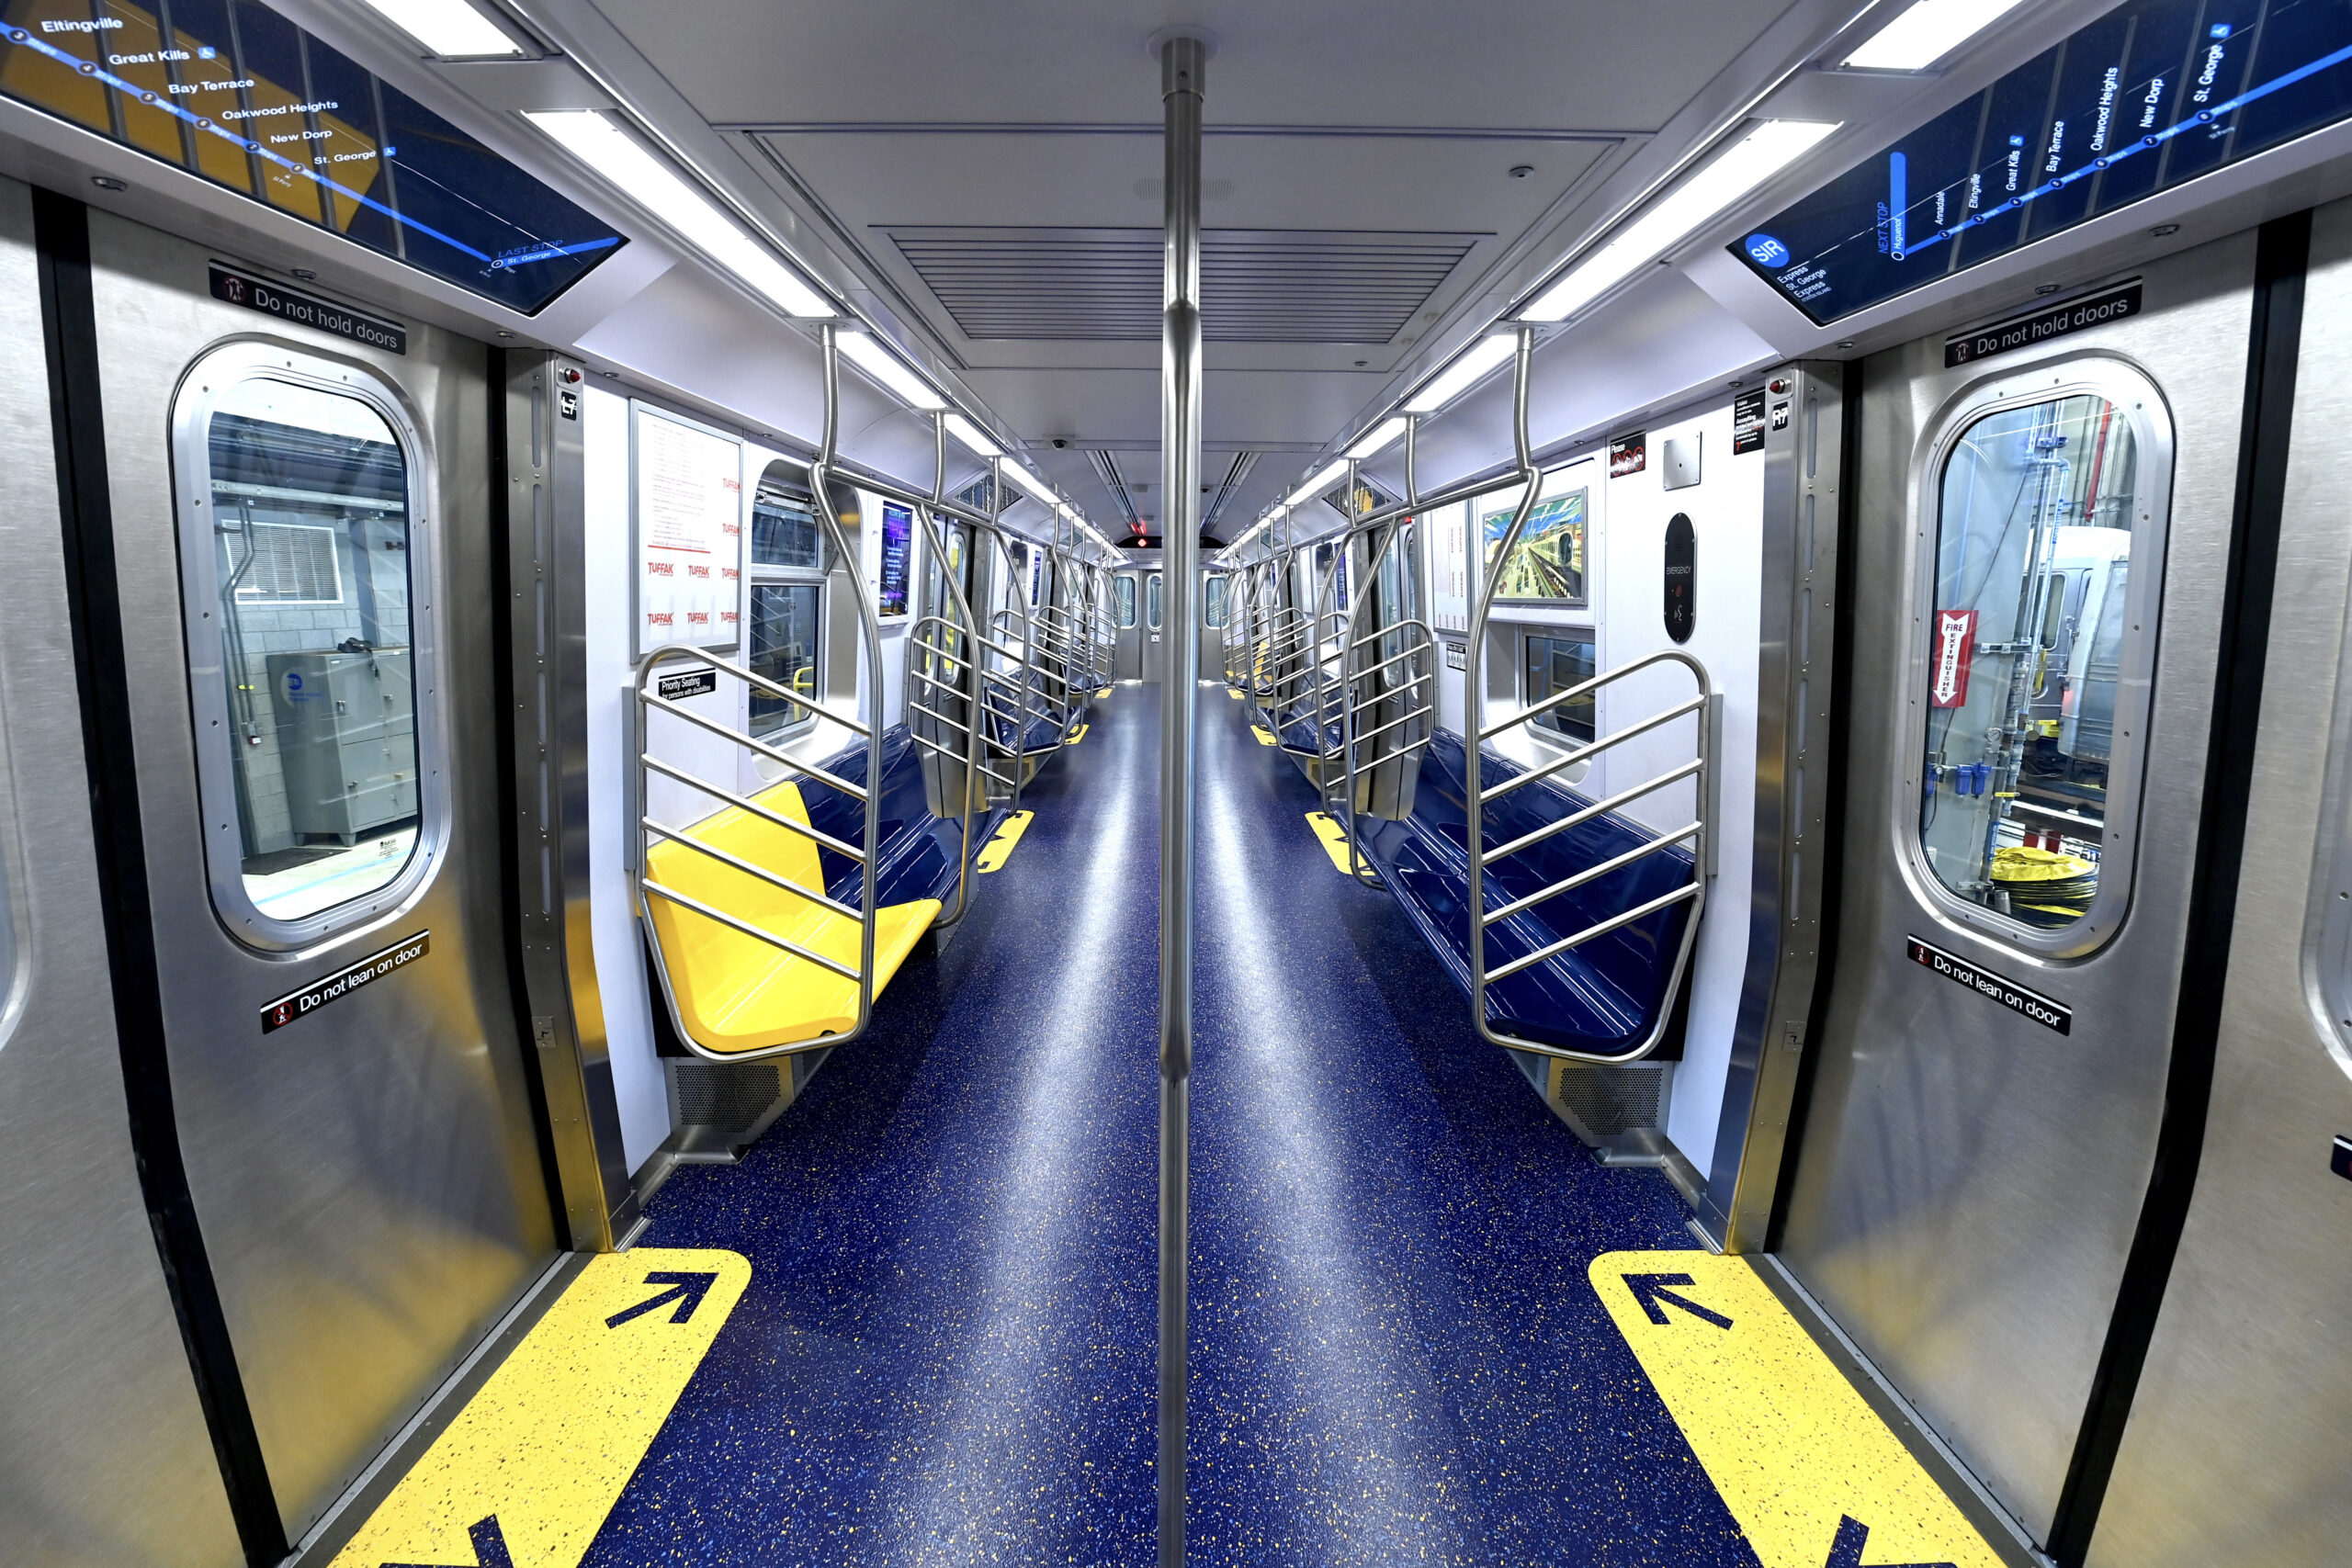 The interior of the new subway cars